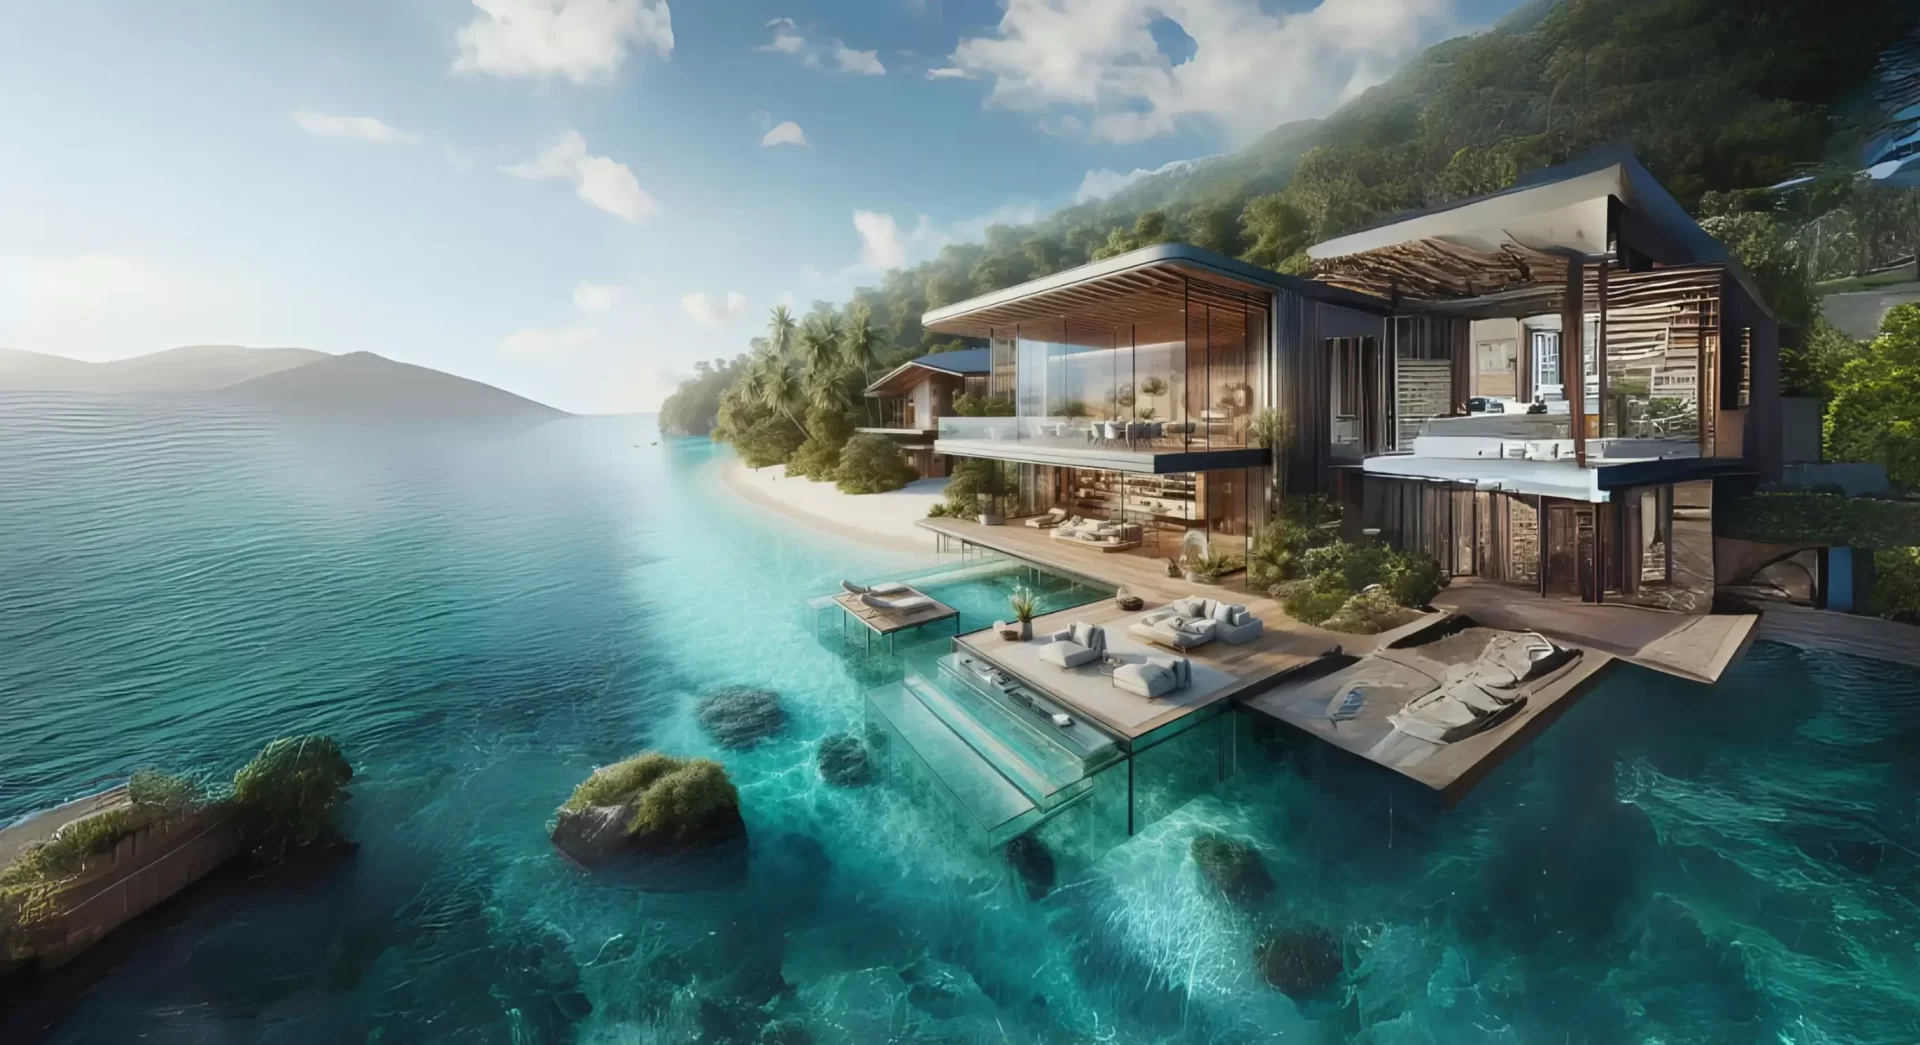 A luxurious house on a secluded island in the mesmerizing ocean.